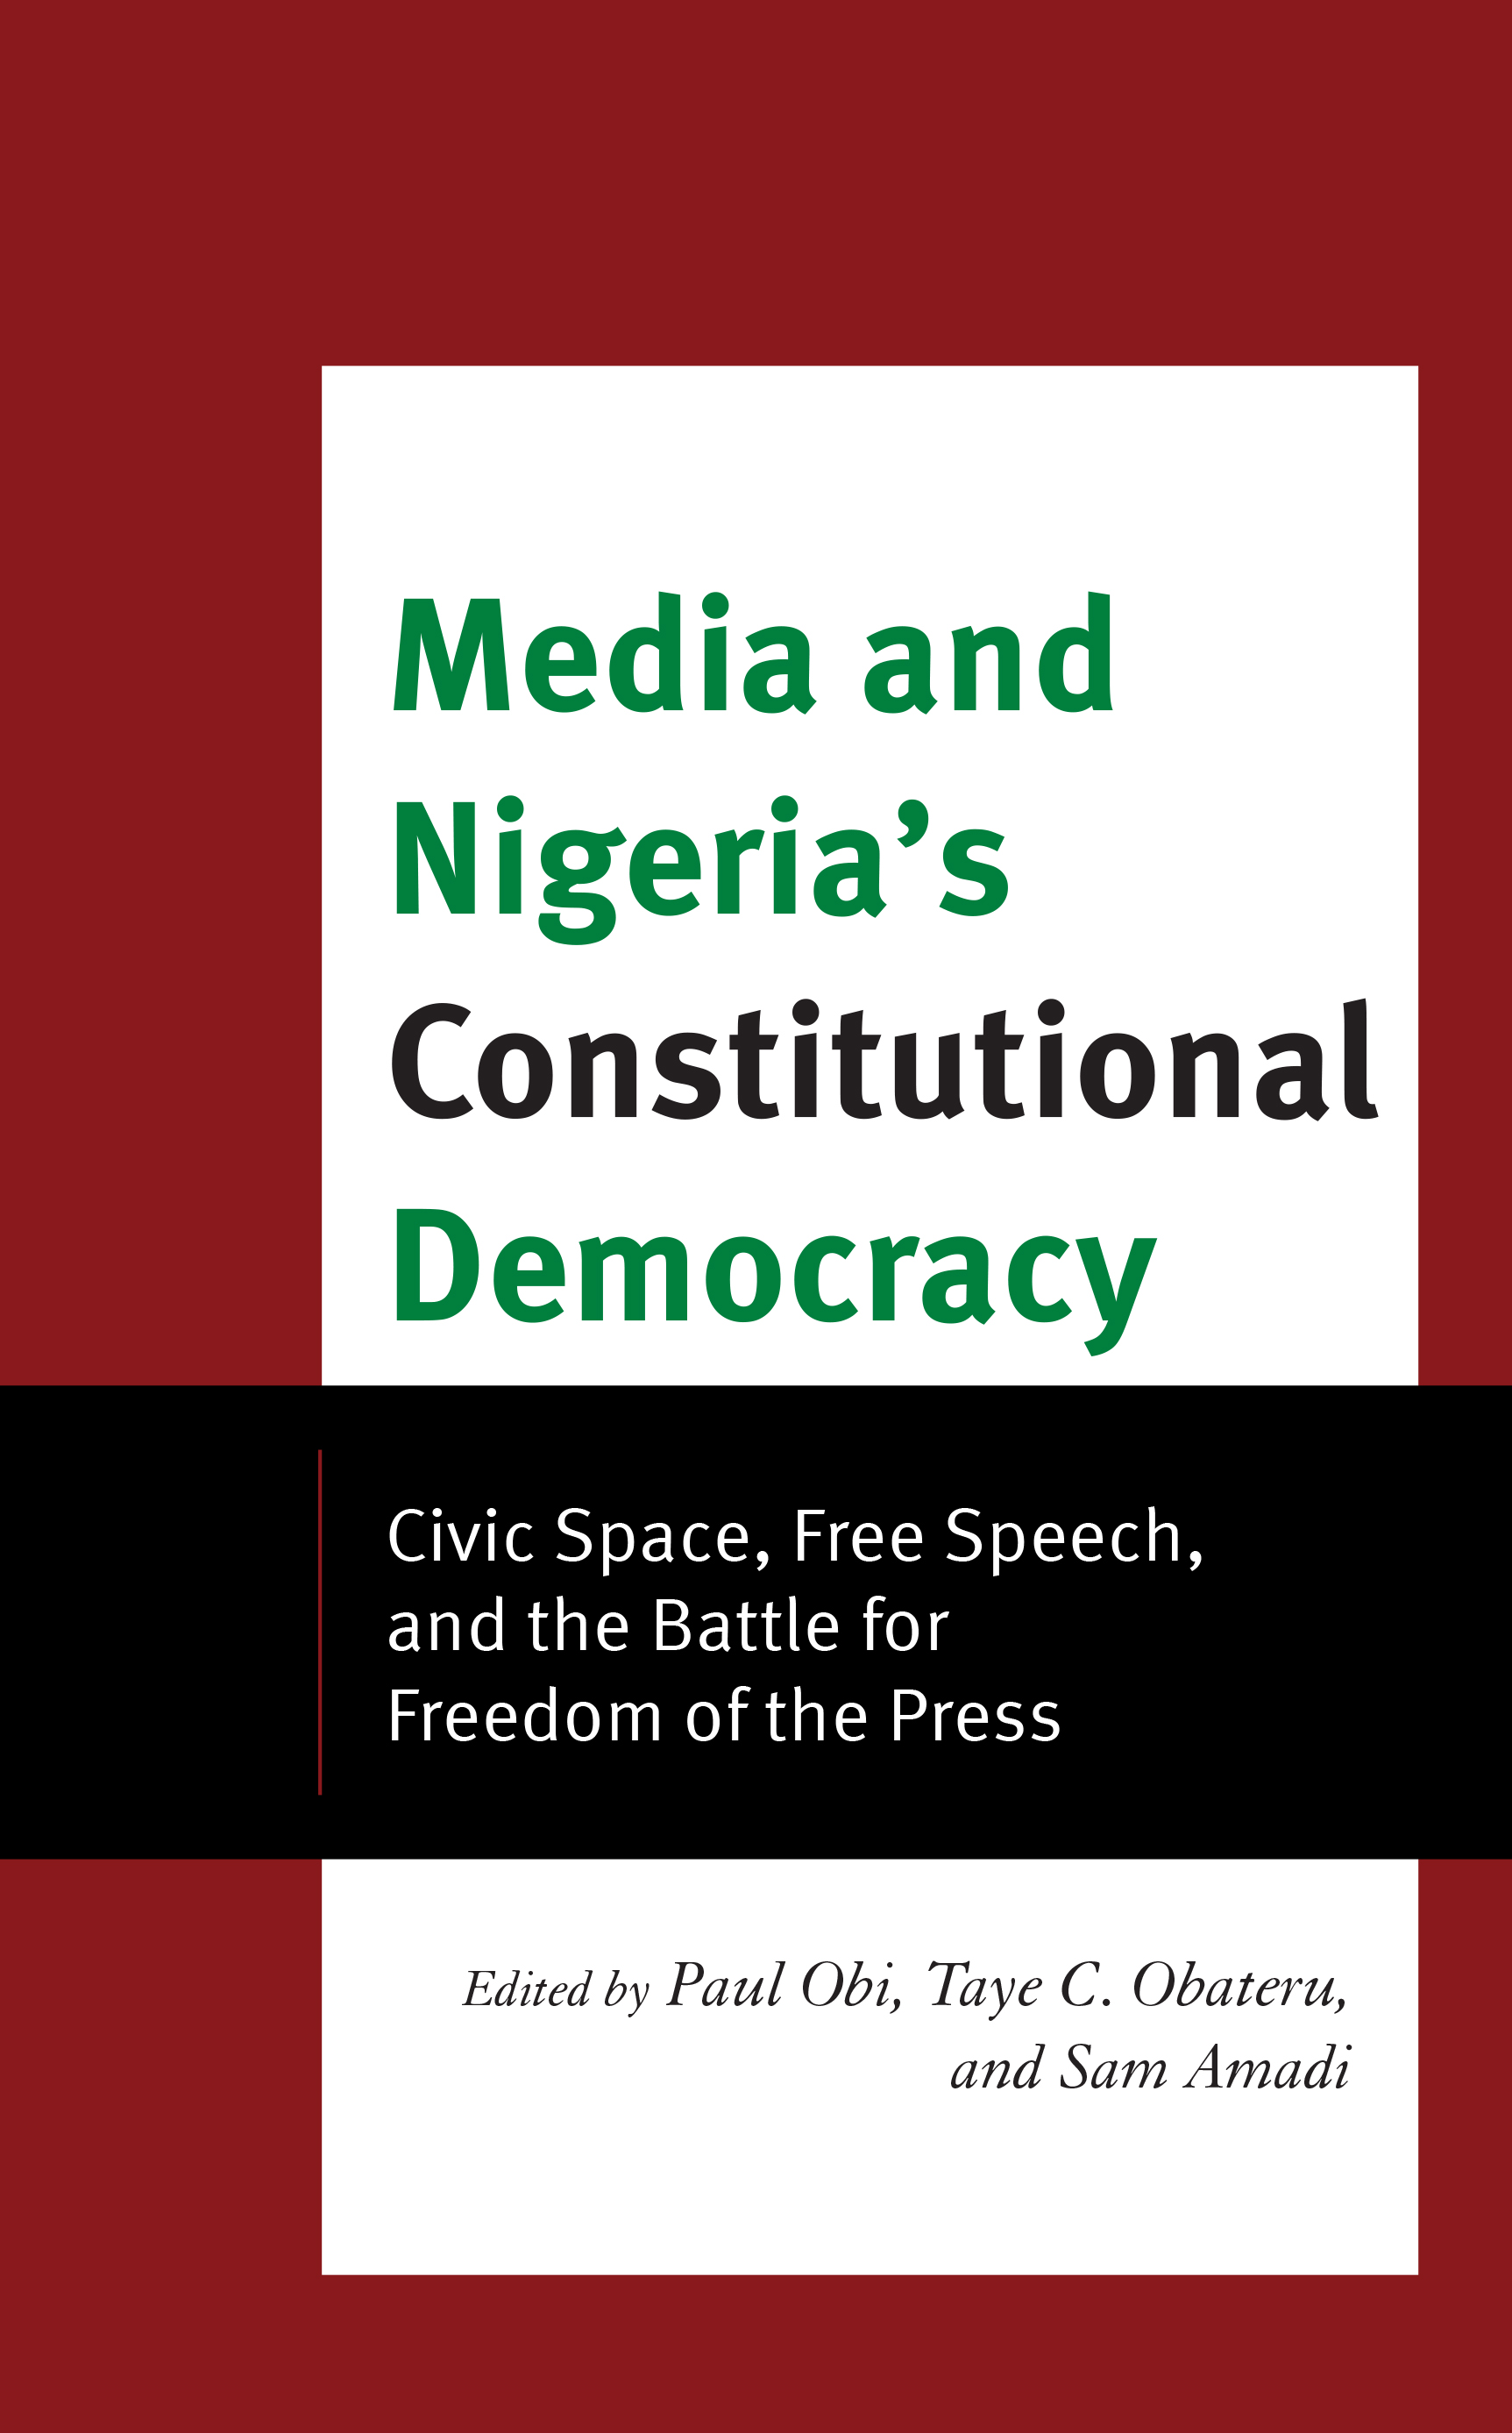 Media and Nigeria's Constitutional Democracy: Civic Space, Free Speech, and the Battle for Freedom of the Press